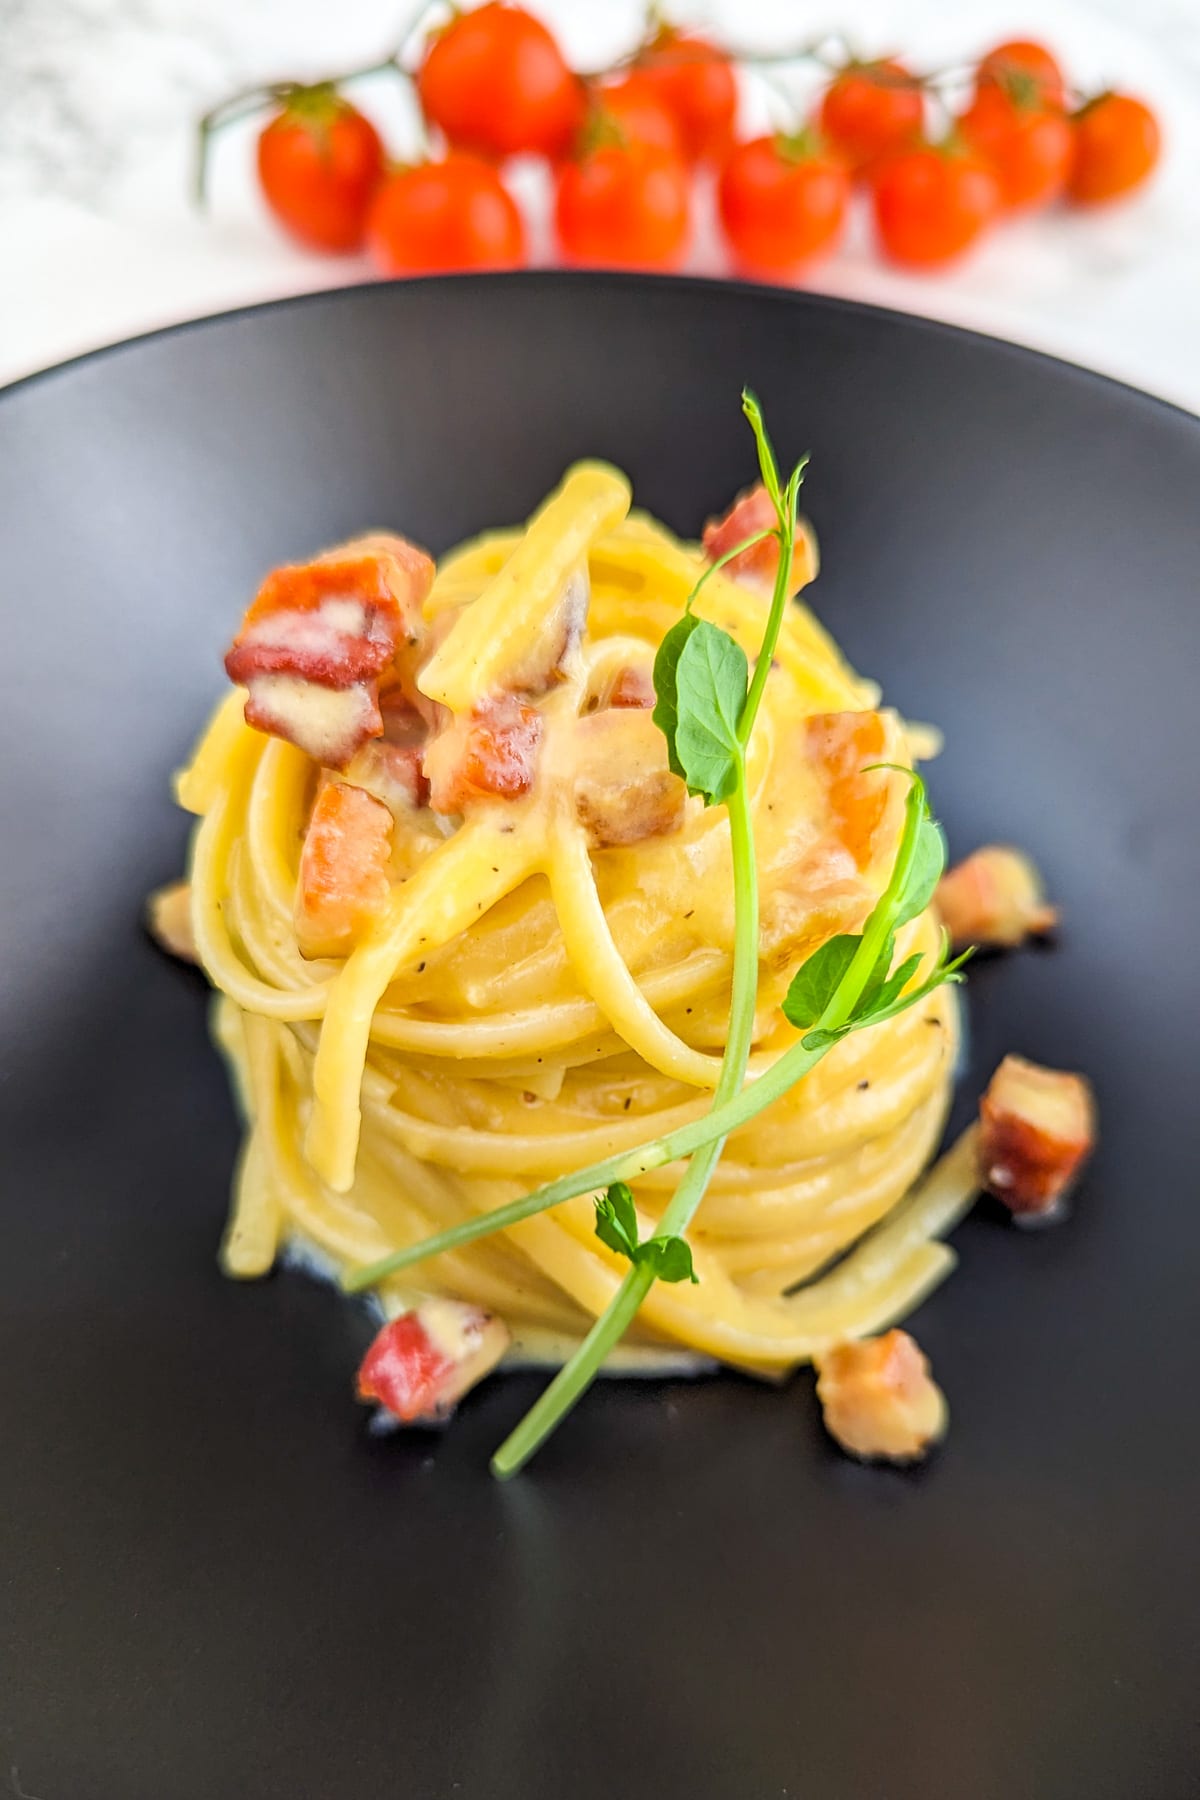 Elegant plating of carbonara pasta with bacon served on a black plate.